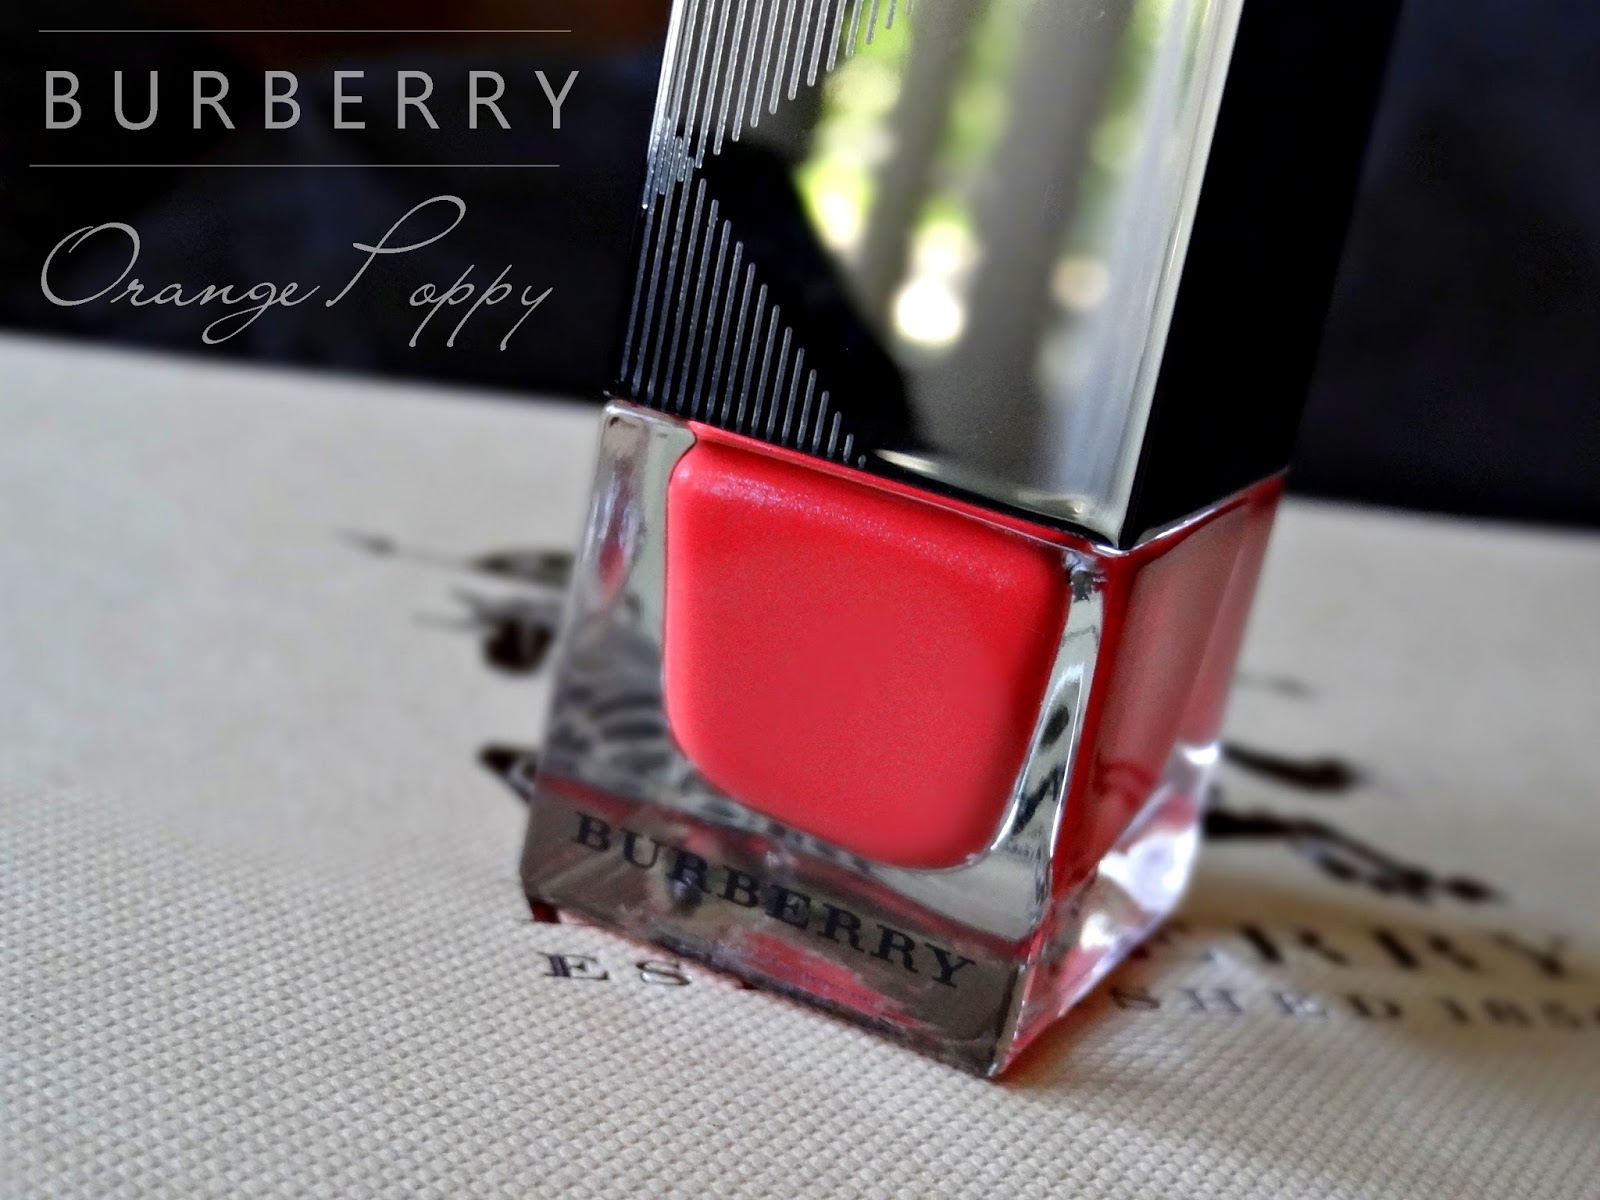 Burberry Summer Showers Makeup Collection Nail Polish in Orange Poppy No 221